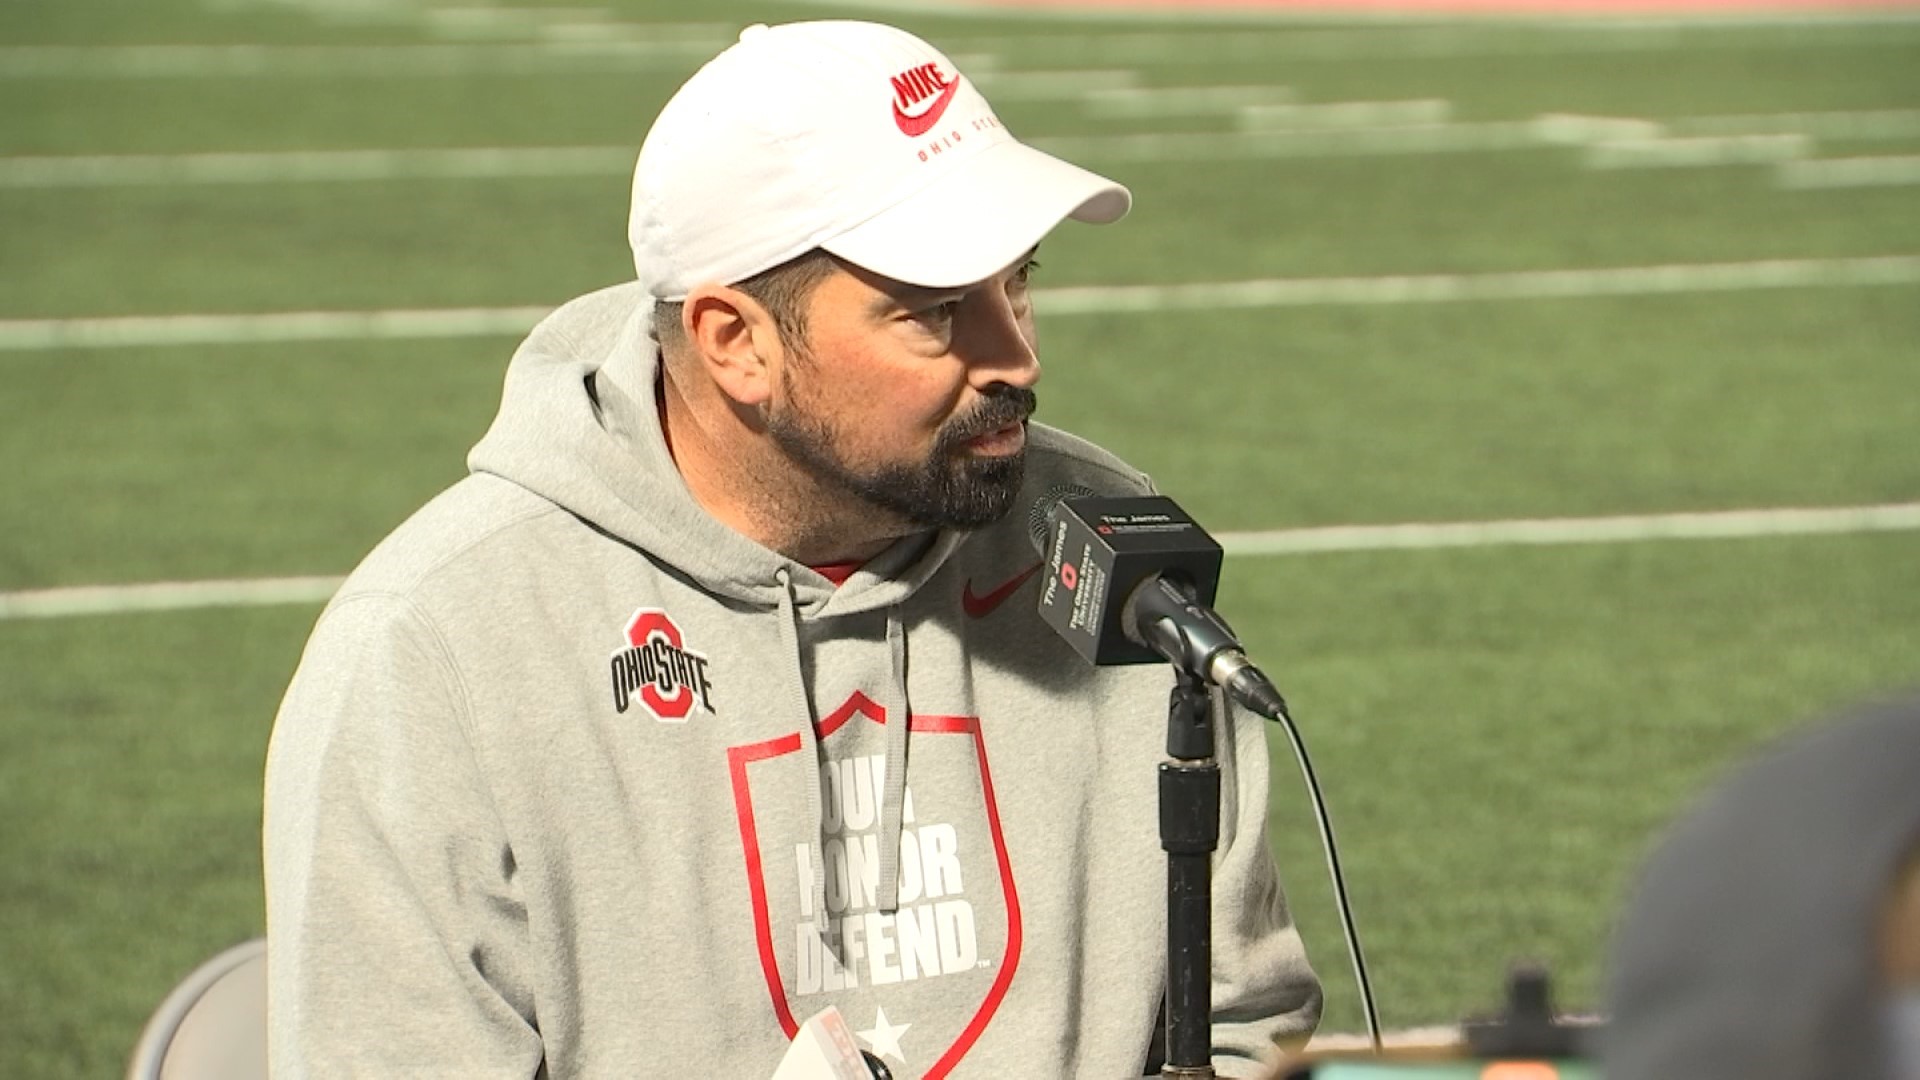 Ohio State coach Ryan Day has denied the claims that the program shared Michigan's signs ahead of their 2022 Big Ten Championship game.